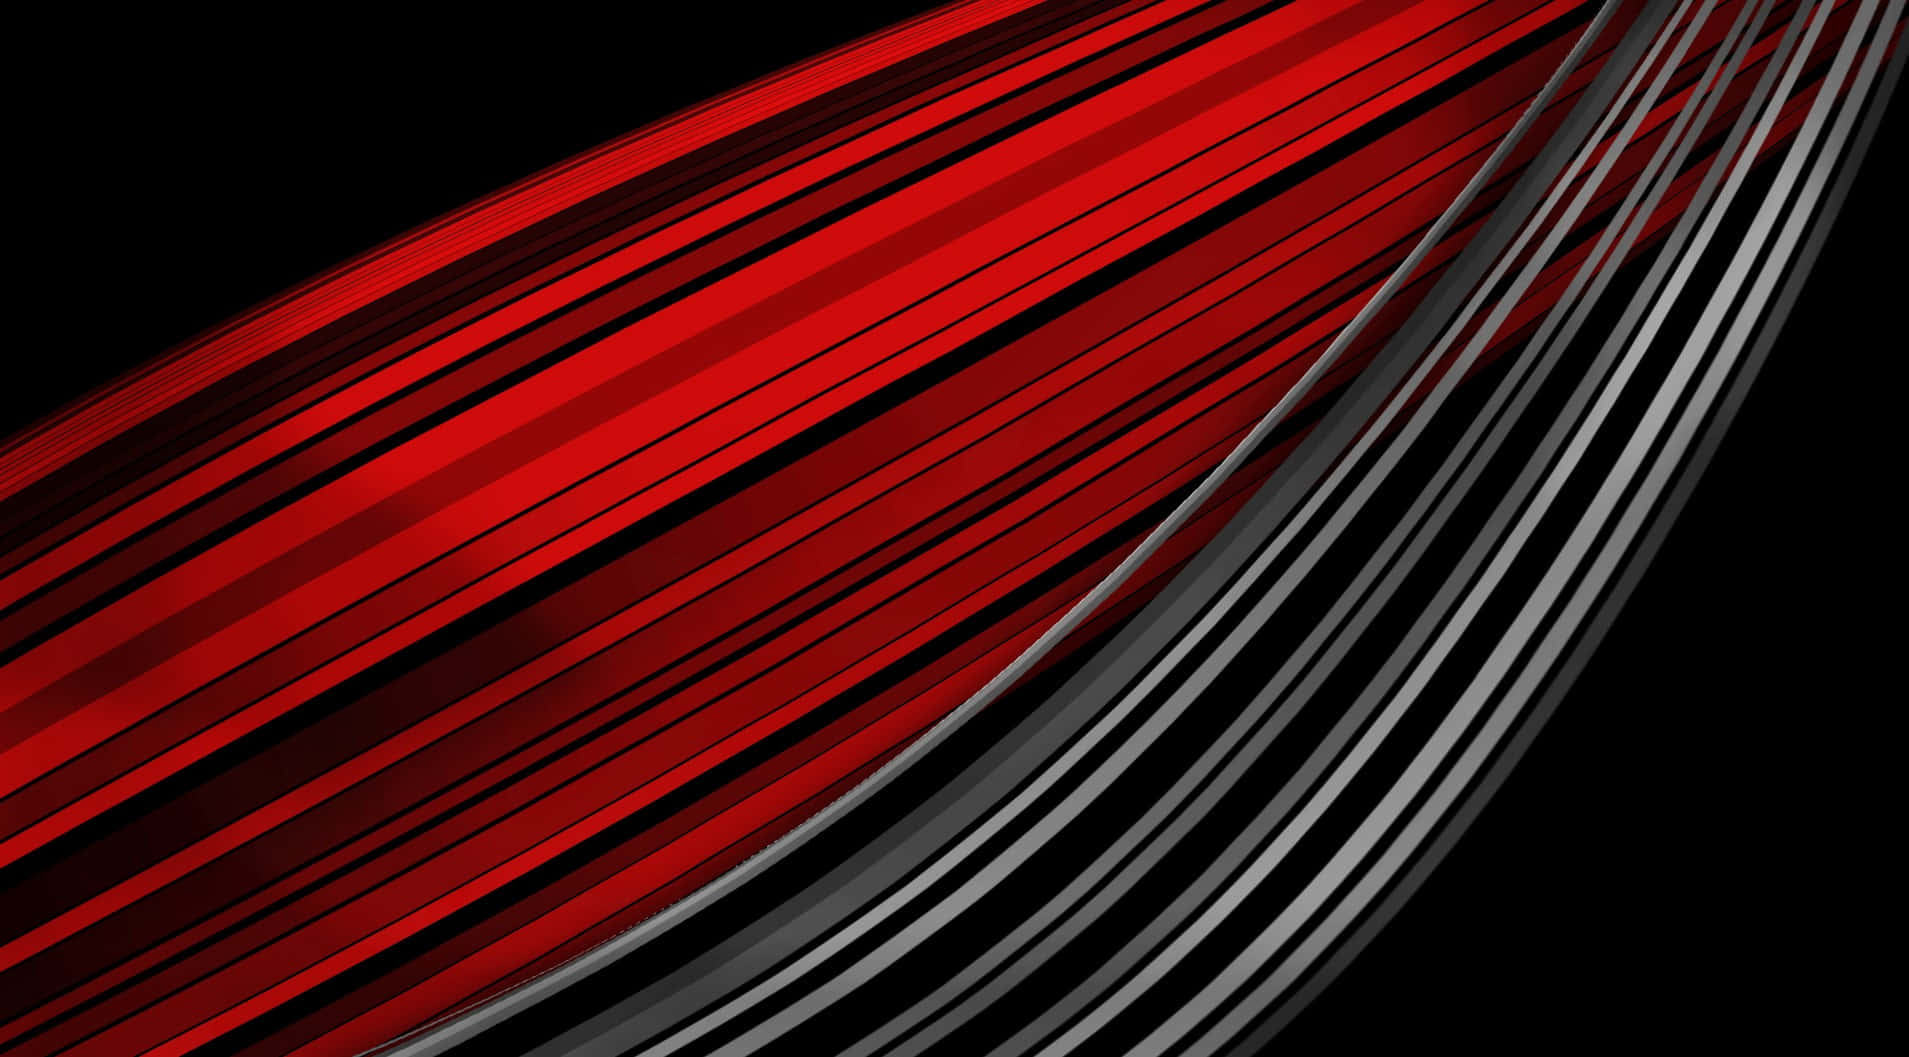 A vivid red and black 1080p background